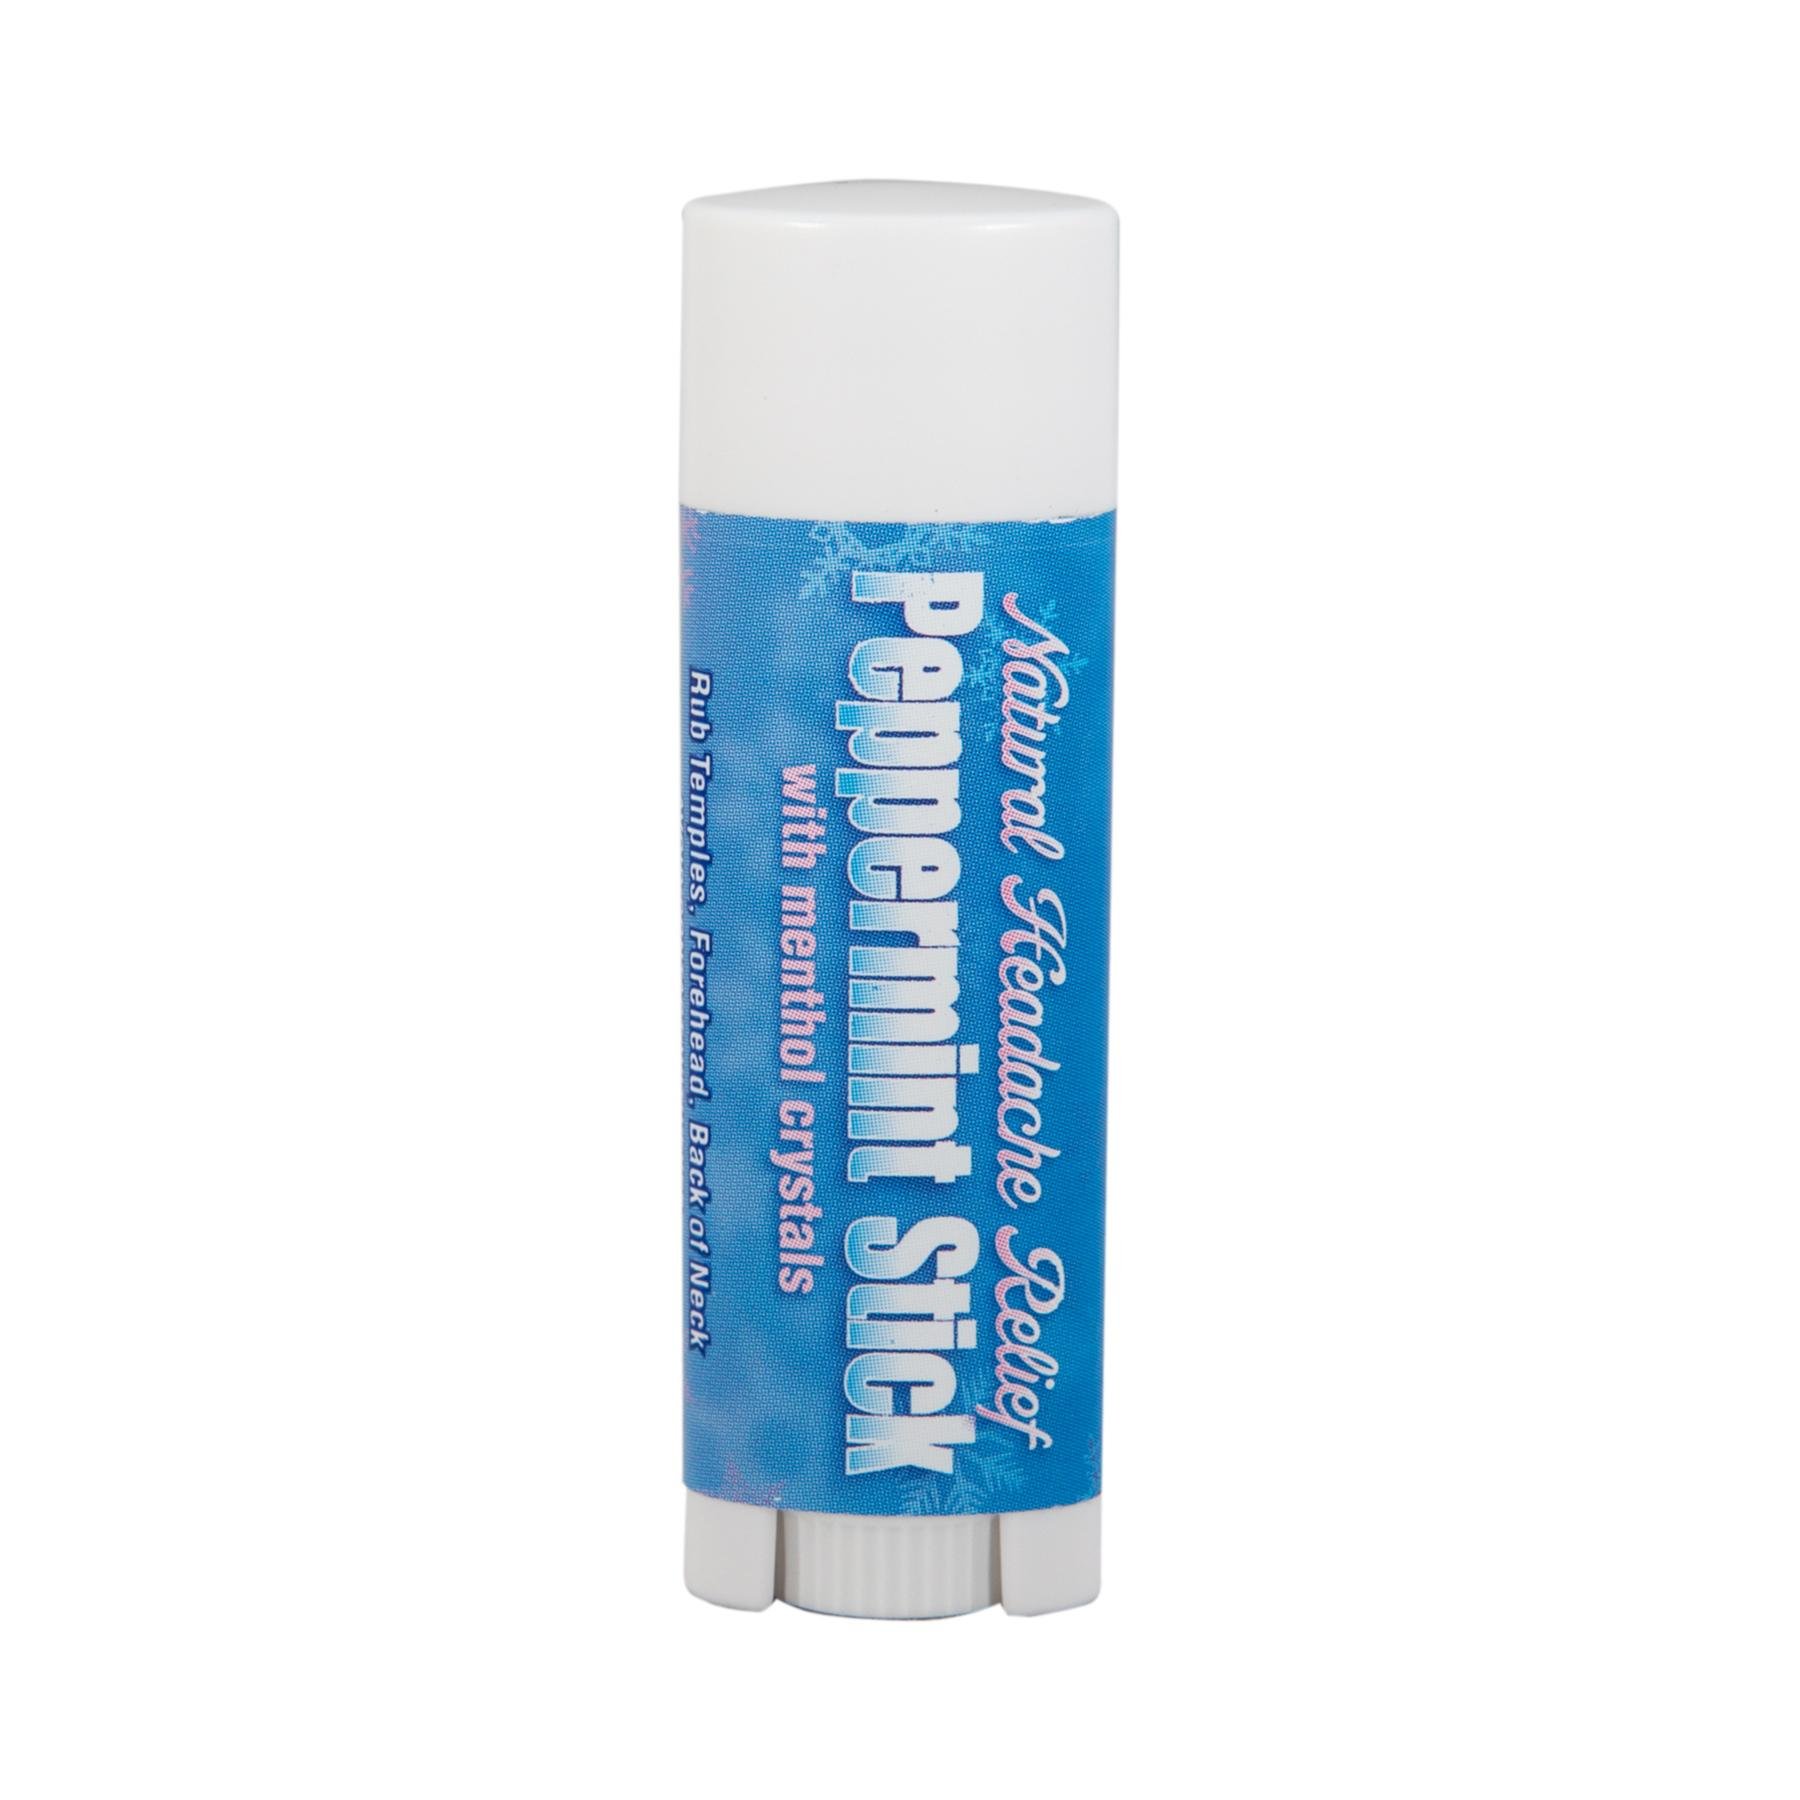 Peppermint Sticks Menthol Crystals Rosemary Headache Relief